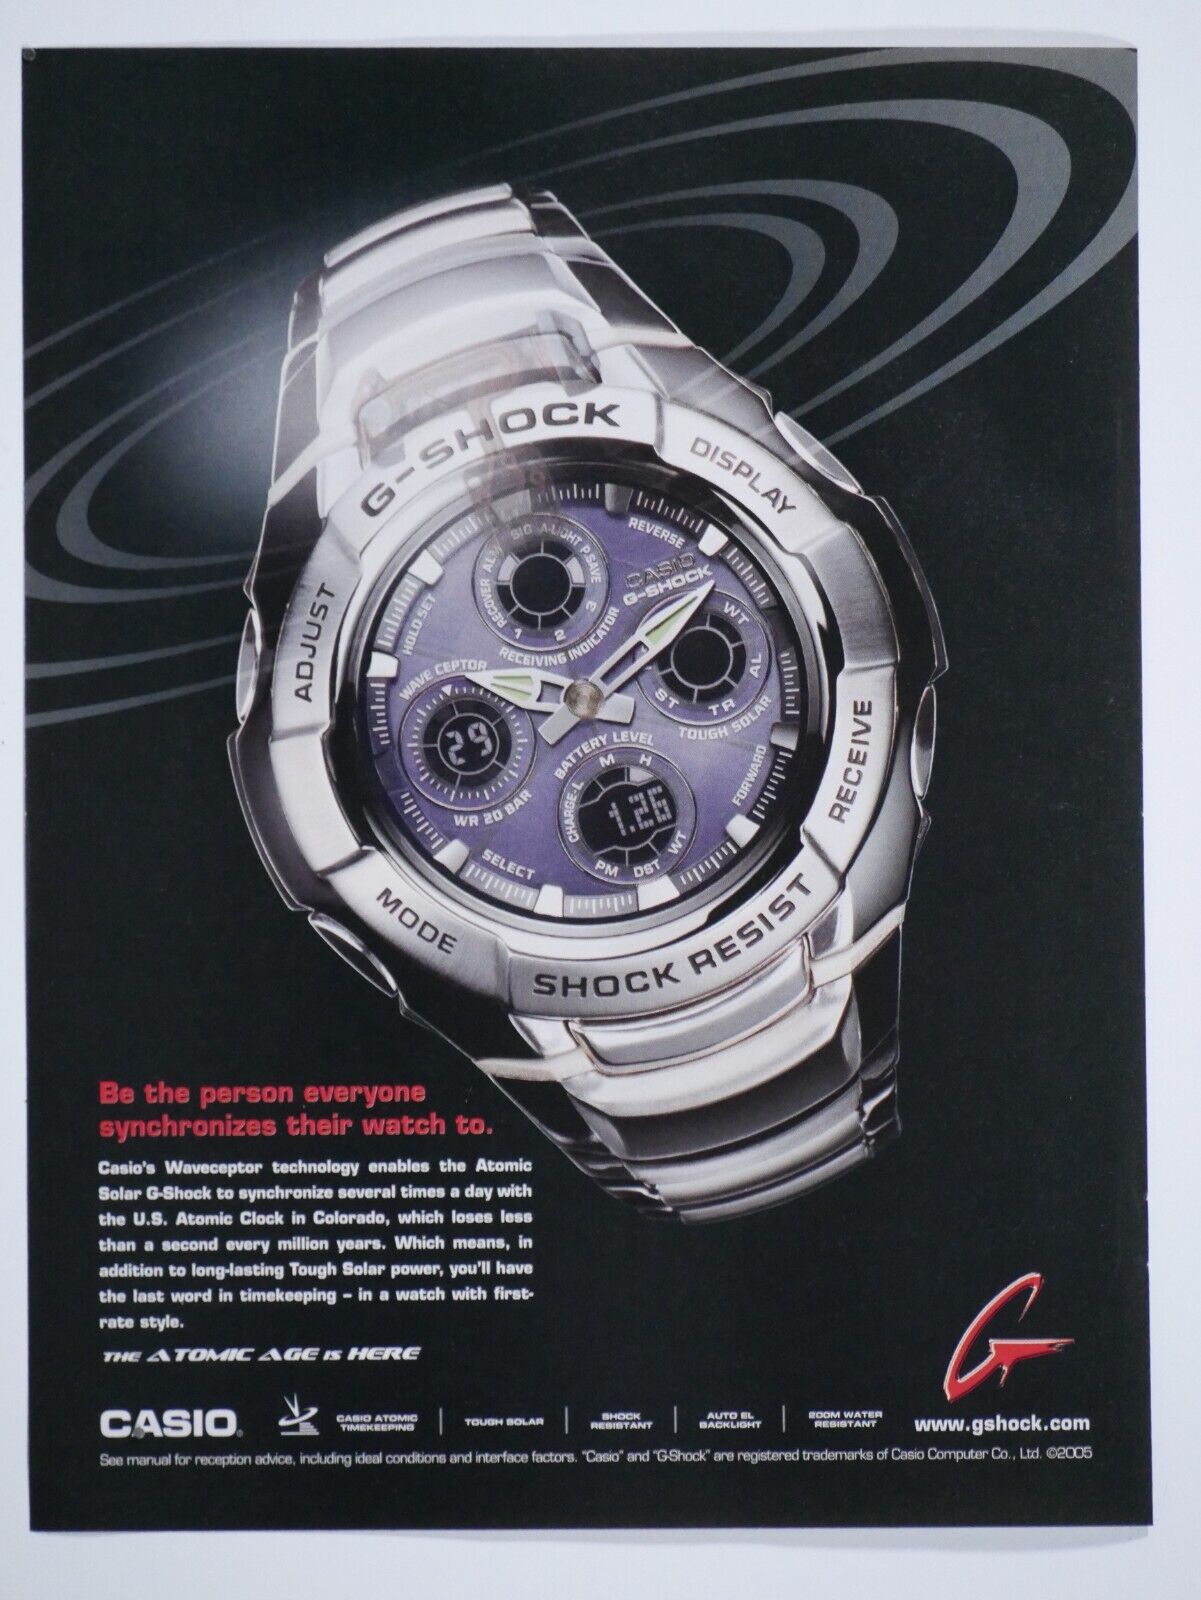 Casio G Shock The Atomic Age Is Here 2006 Original Print Ad 8 x 11\